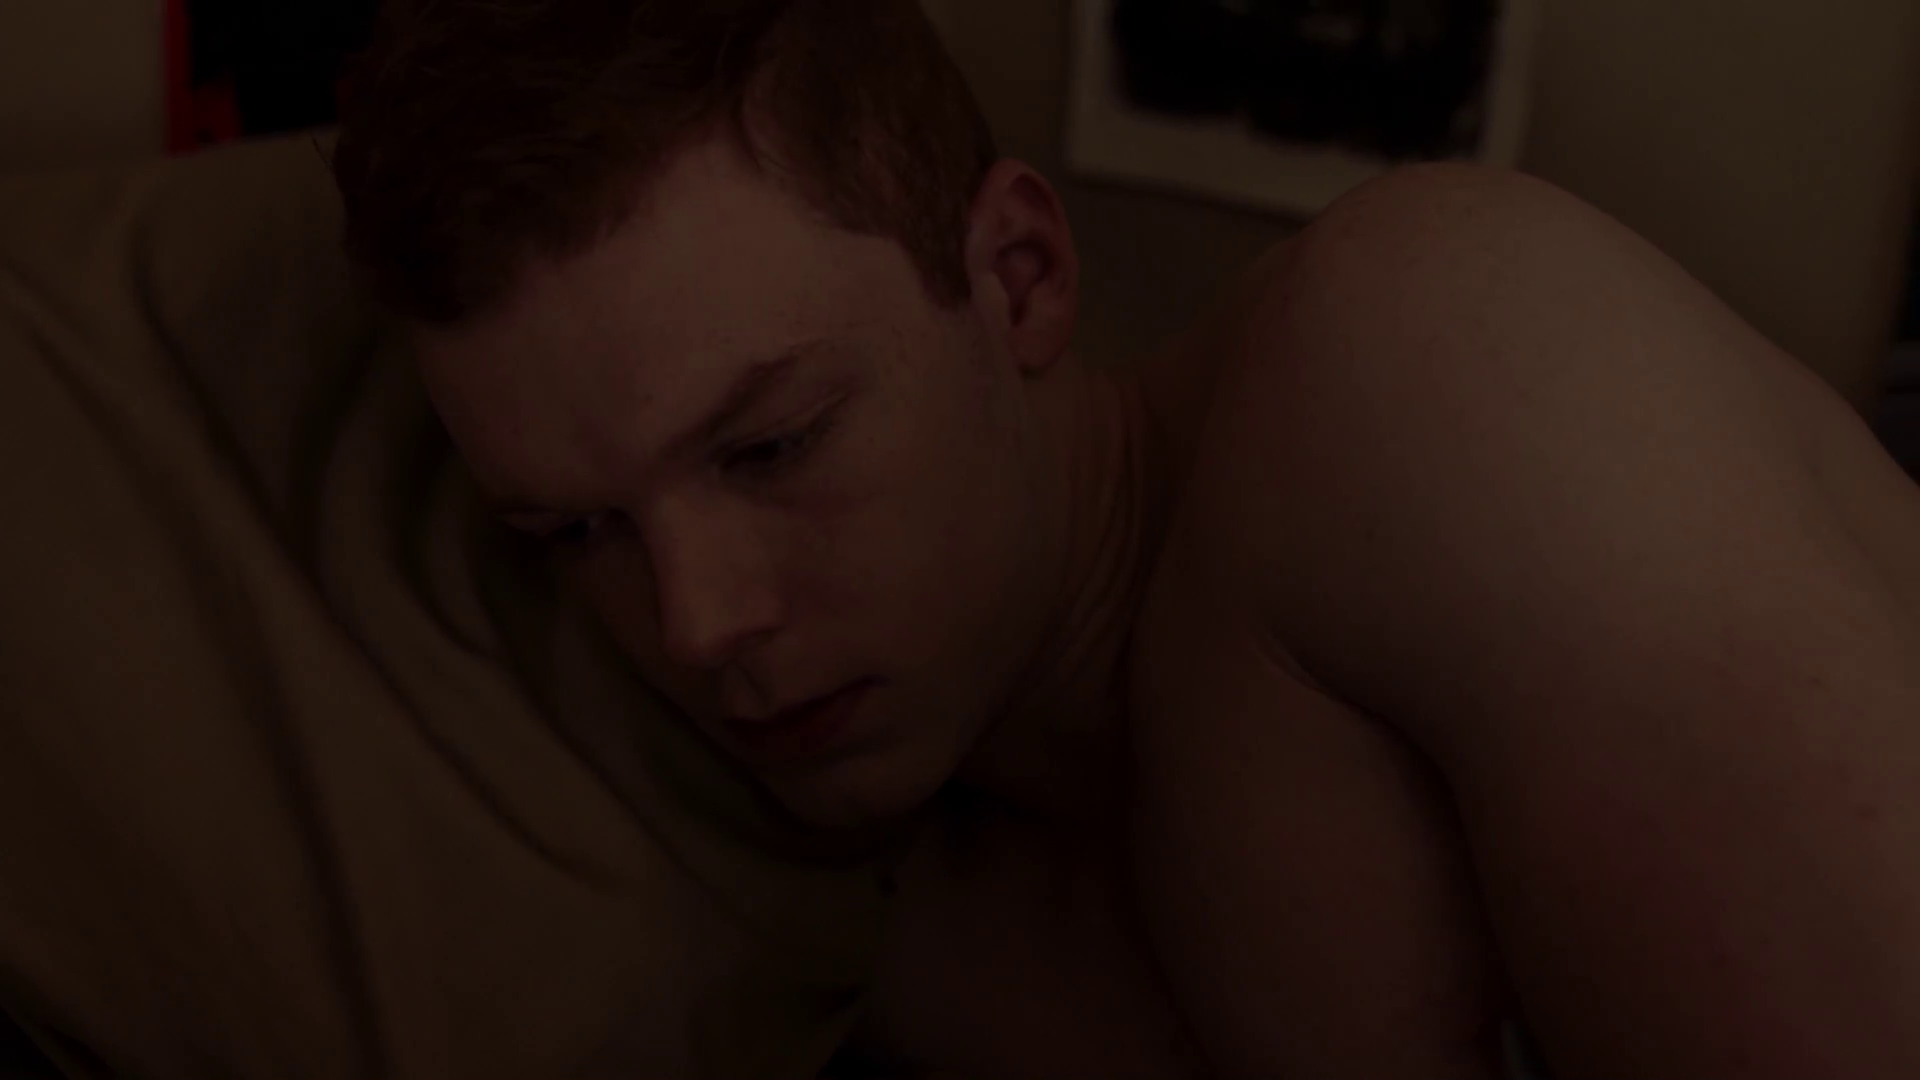 Jeremy Allen White and Cameron Monaghan shirtless in Shameless 8-04 "F...